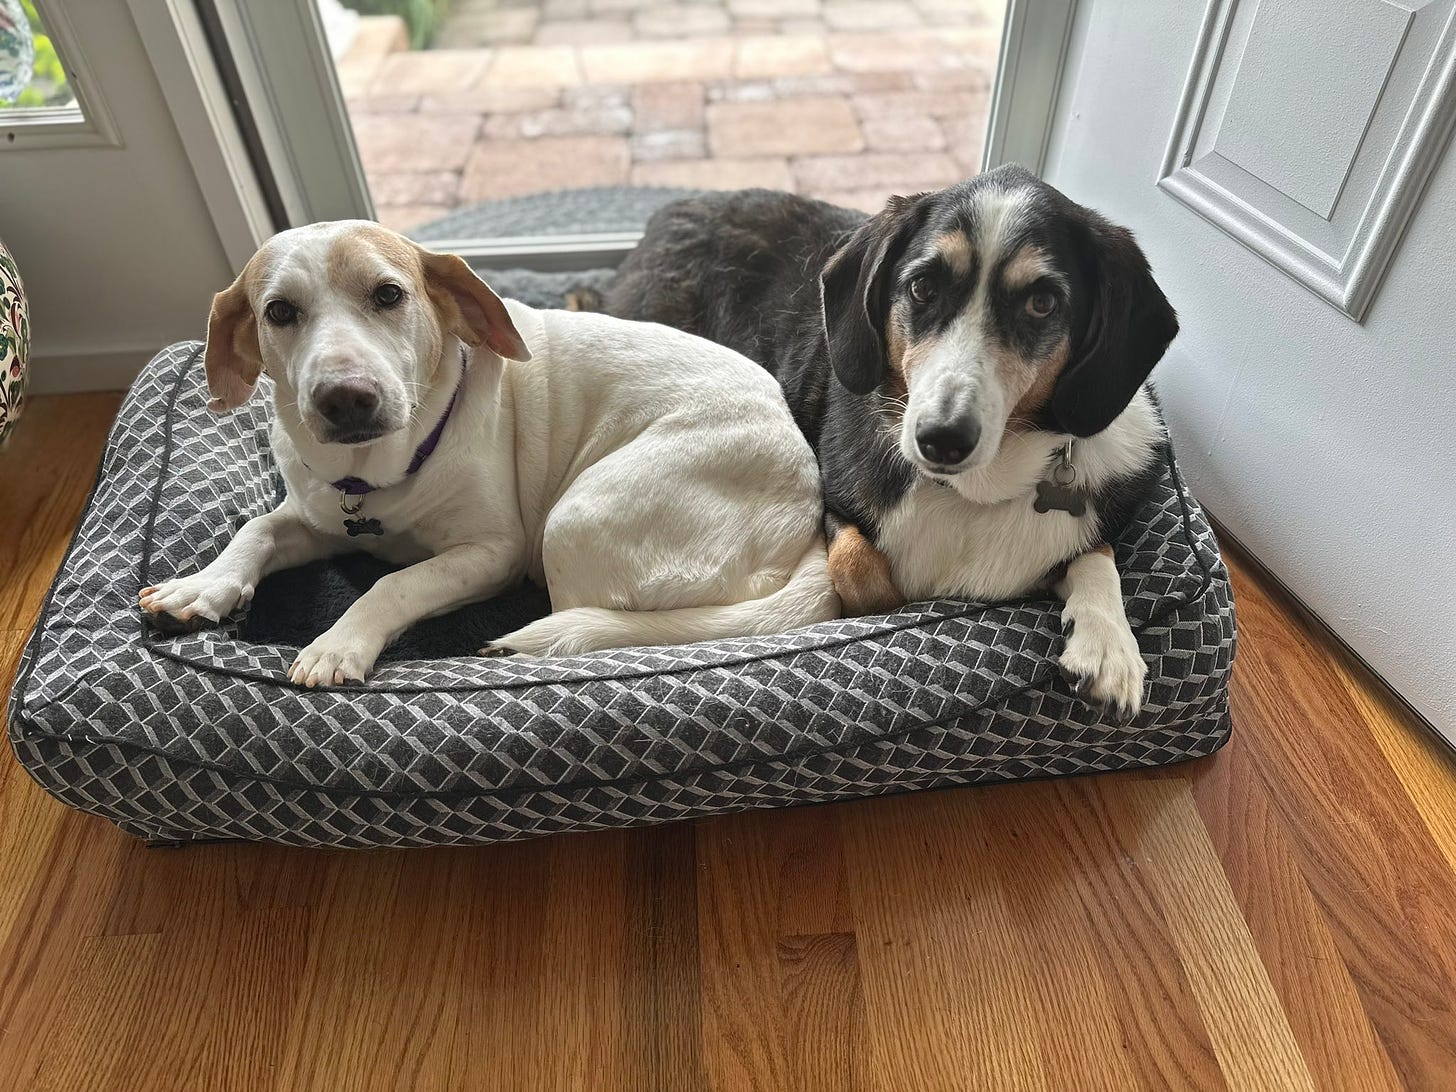 Two dogs on a dog bed in front of an open door. The dog on the left is white and tan; the dog on the right is black, brown, and white. Both are hound mixes.